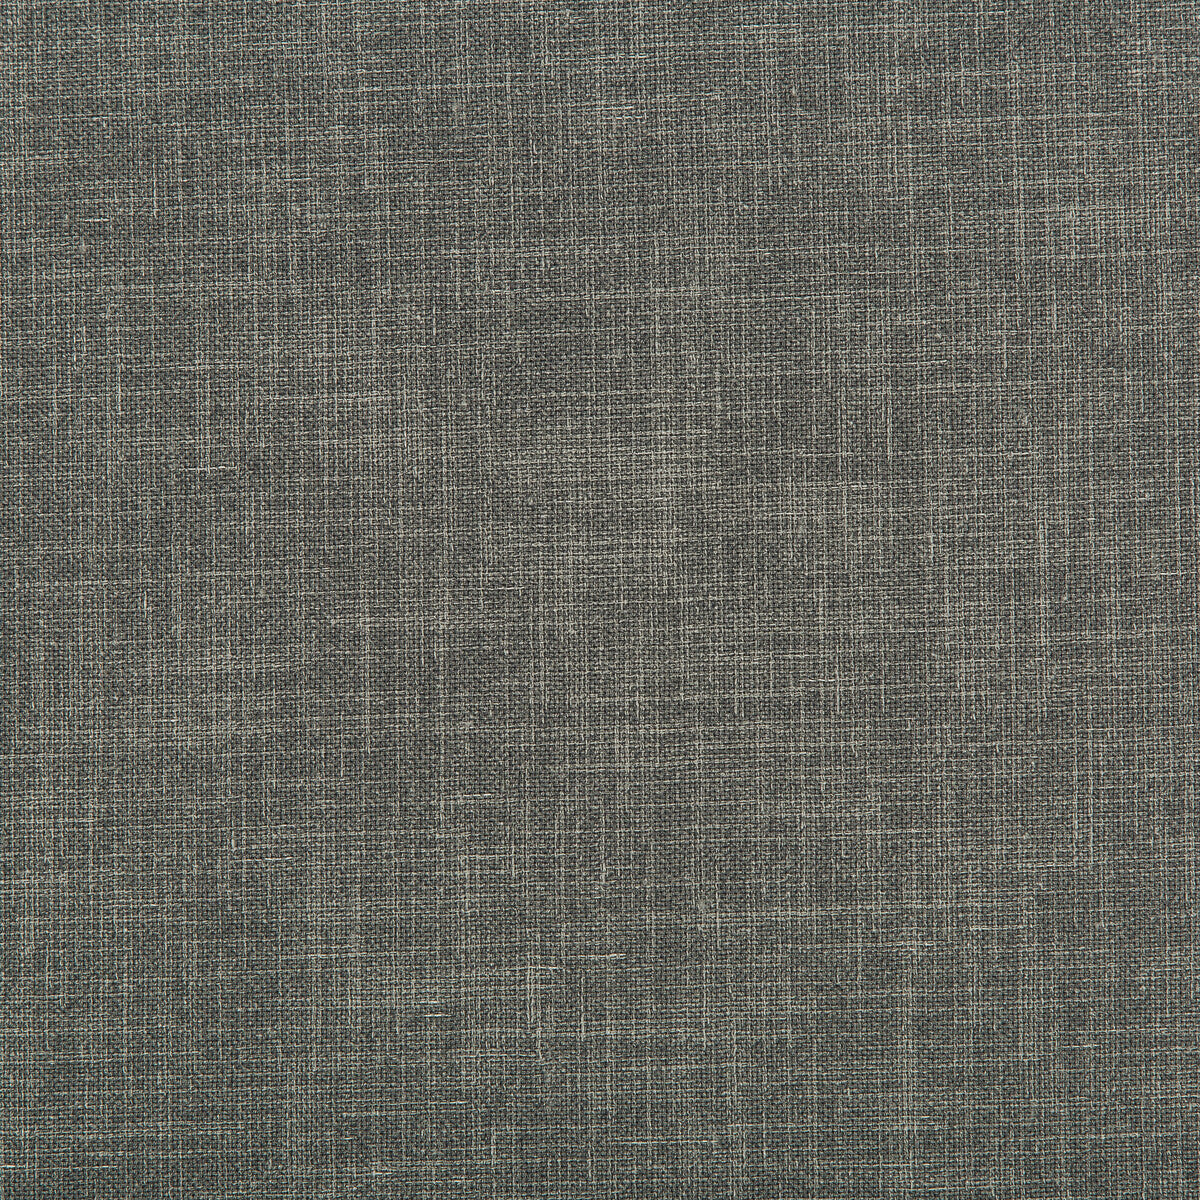 Kravet Contract fabric in 4639-21 color - pattern 4639.21.0 - by Kravet Contract